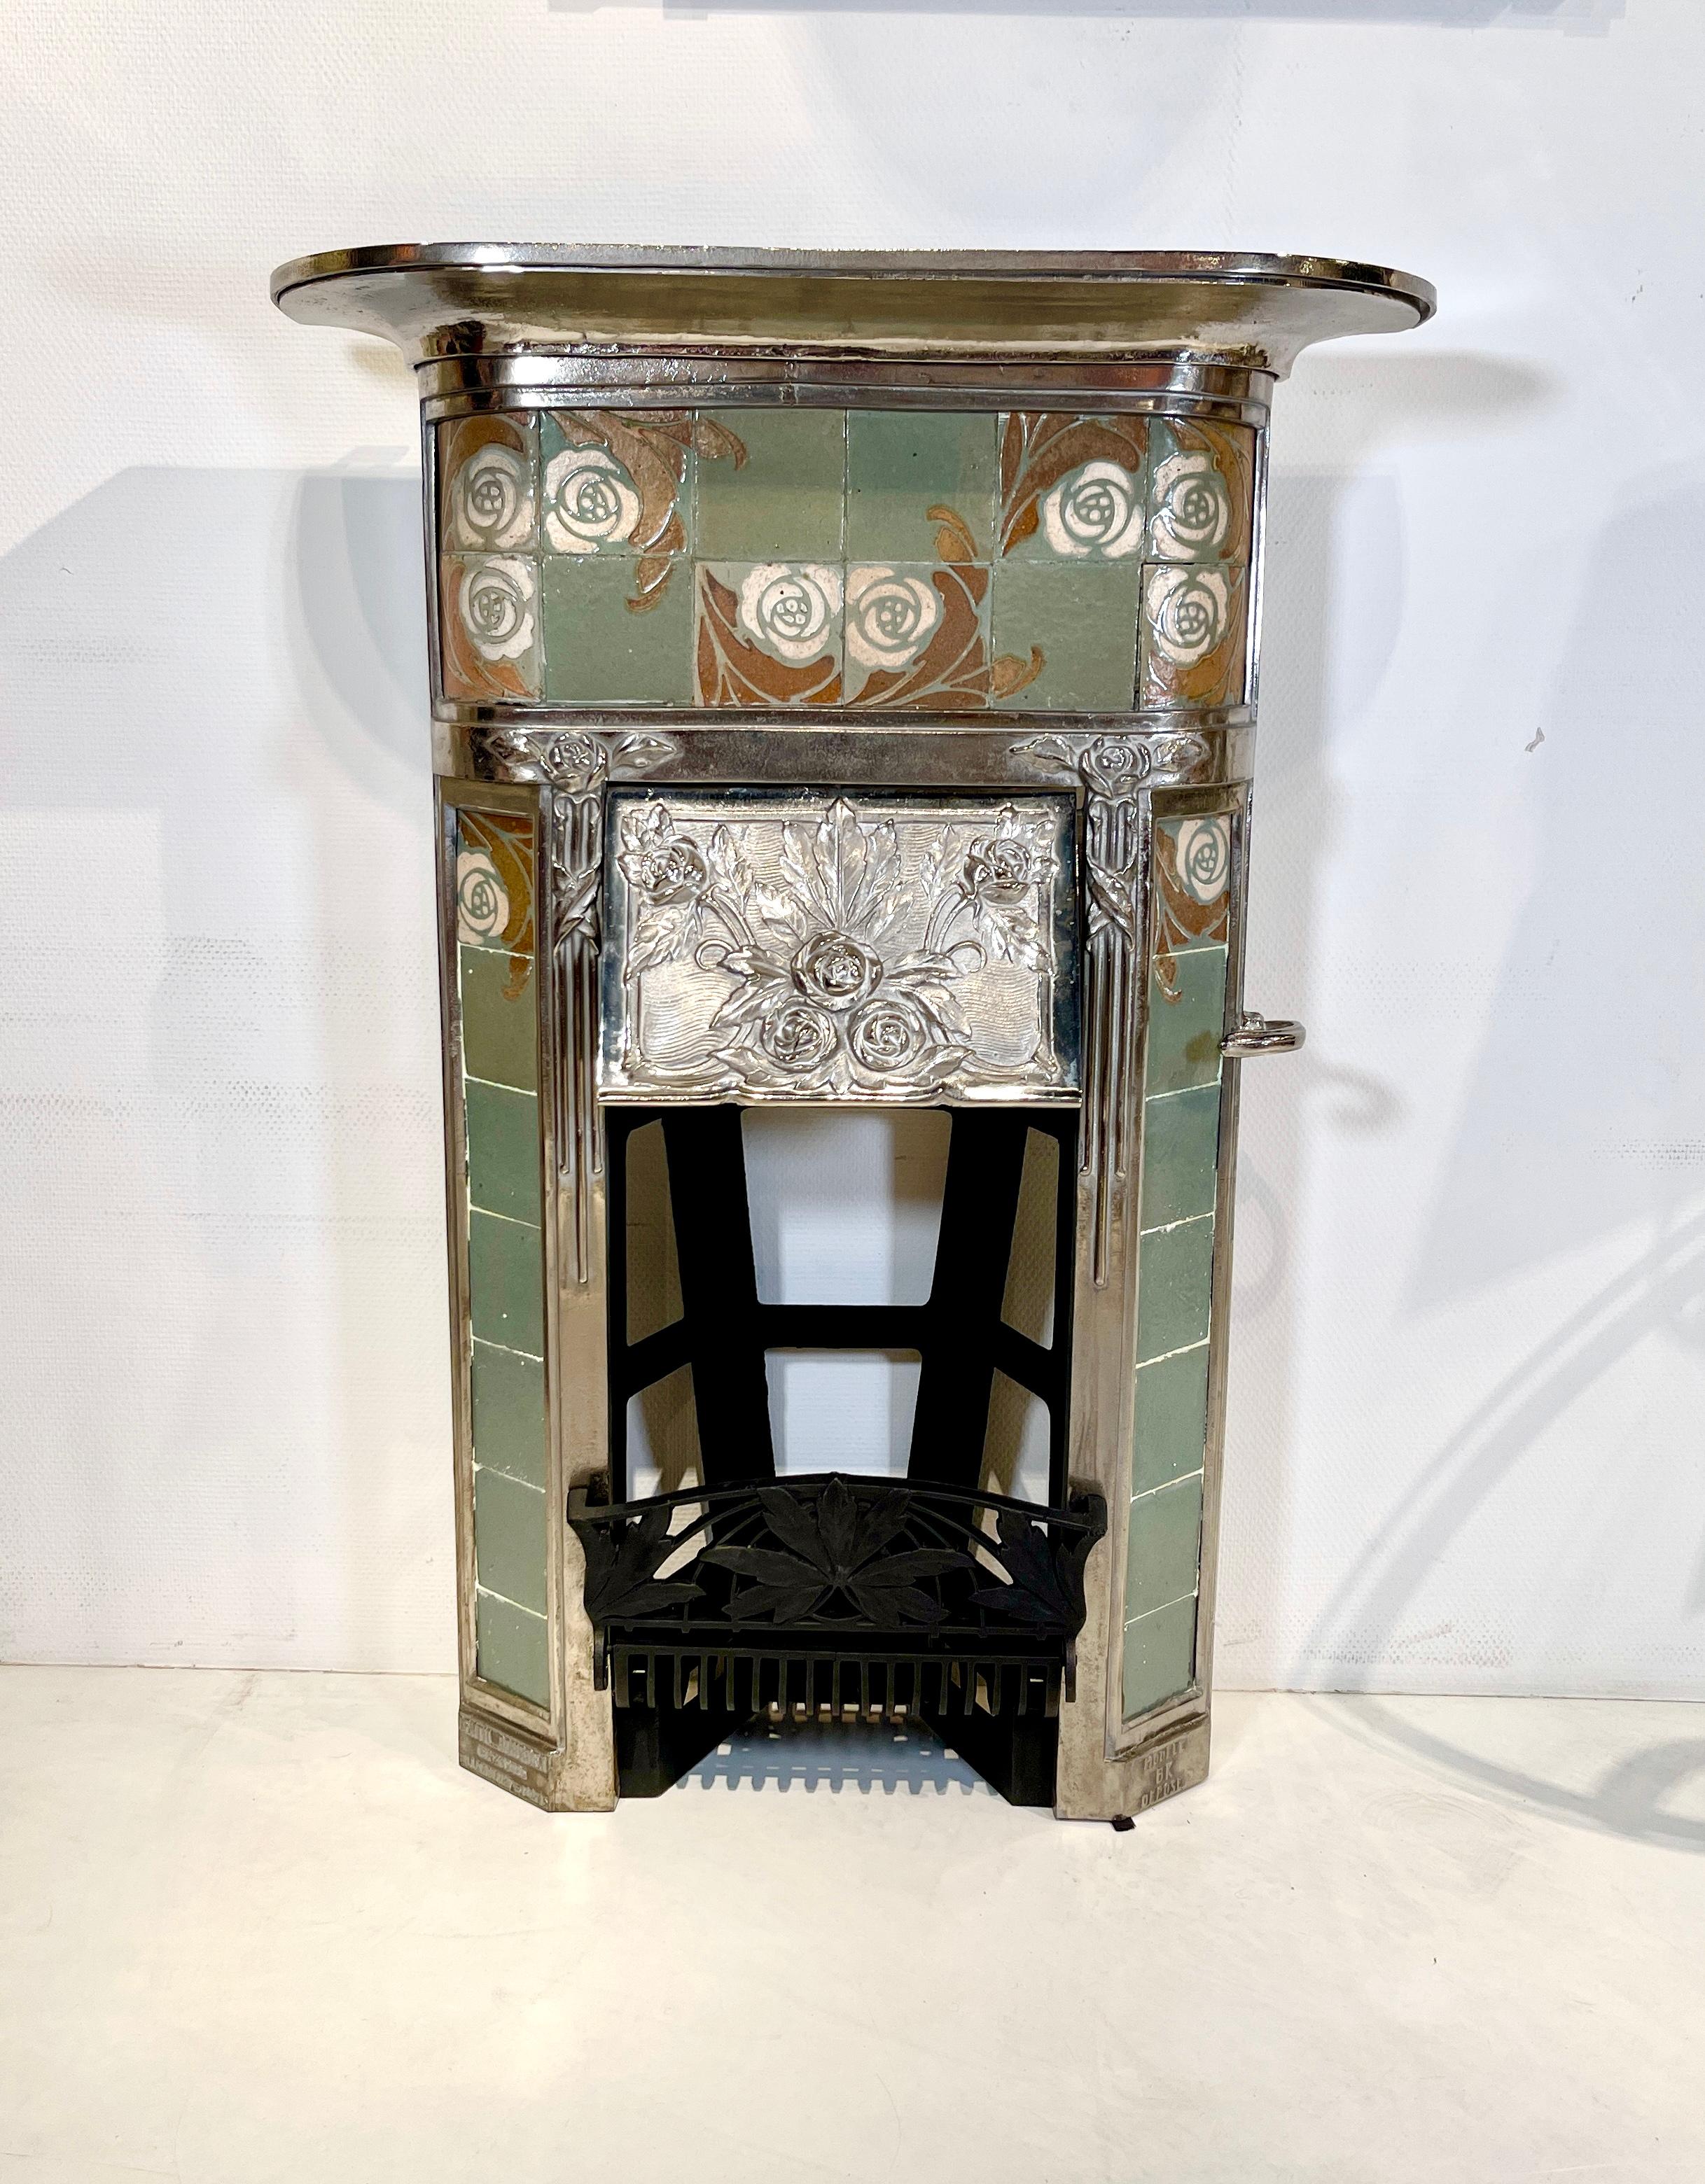 Rare and original fireplaces By Sue et mare, completely, cleaning and restored. ready to placed. signed by the ceramic company (Gentil-Bourdet ceramiste Billancourt Paris).